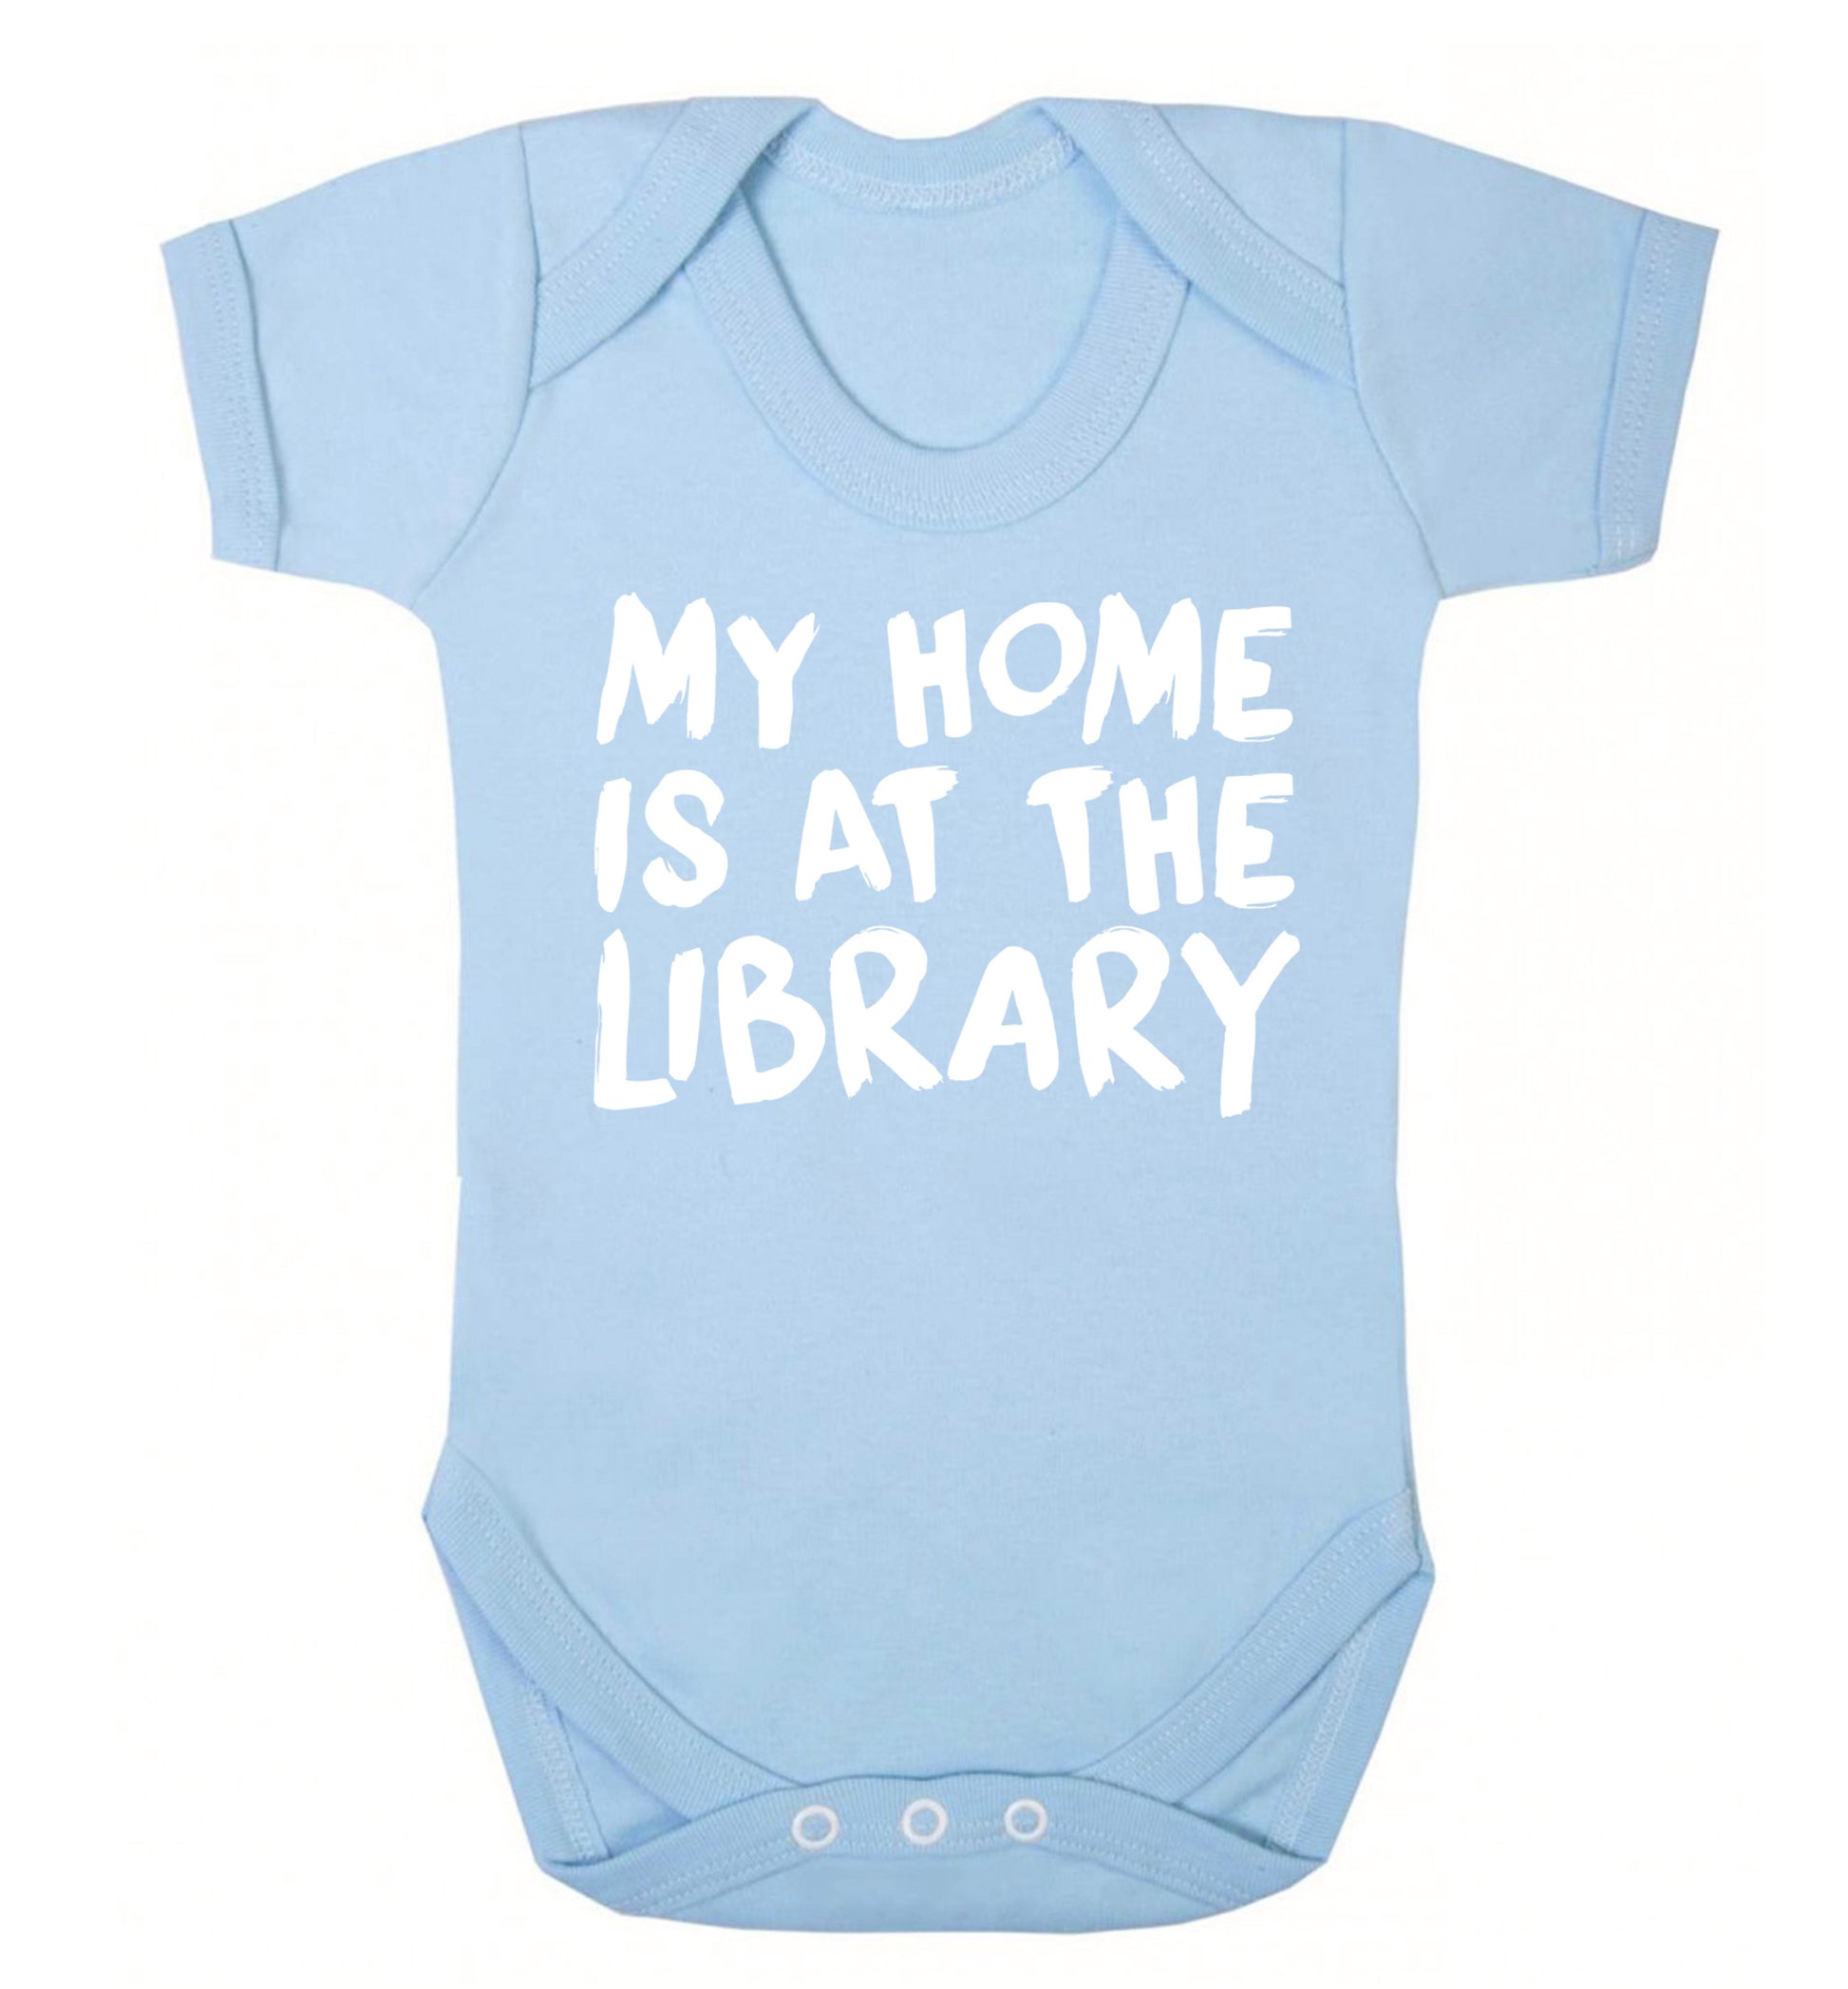 My home is at the library Baby Vest pale blue 18-24 months